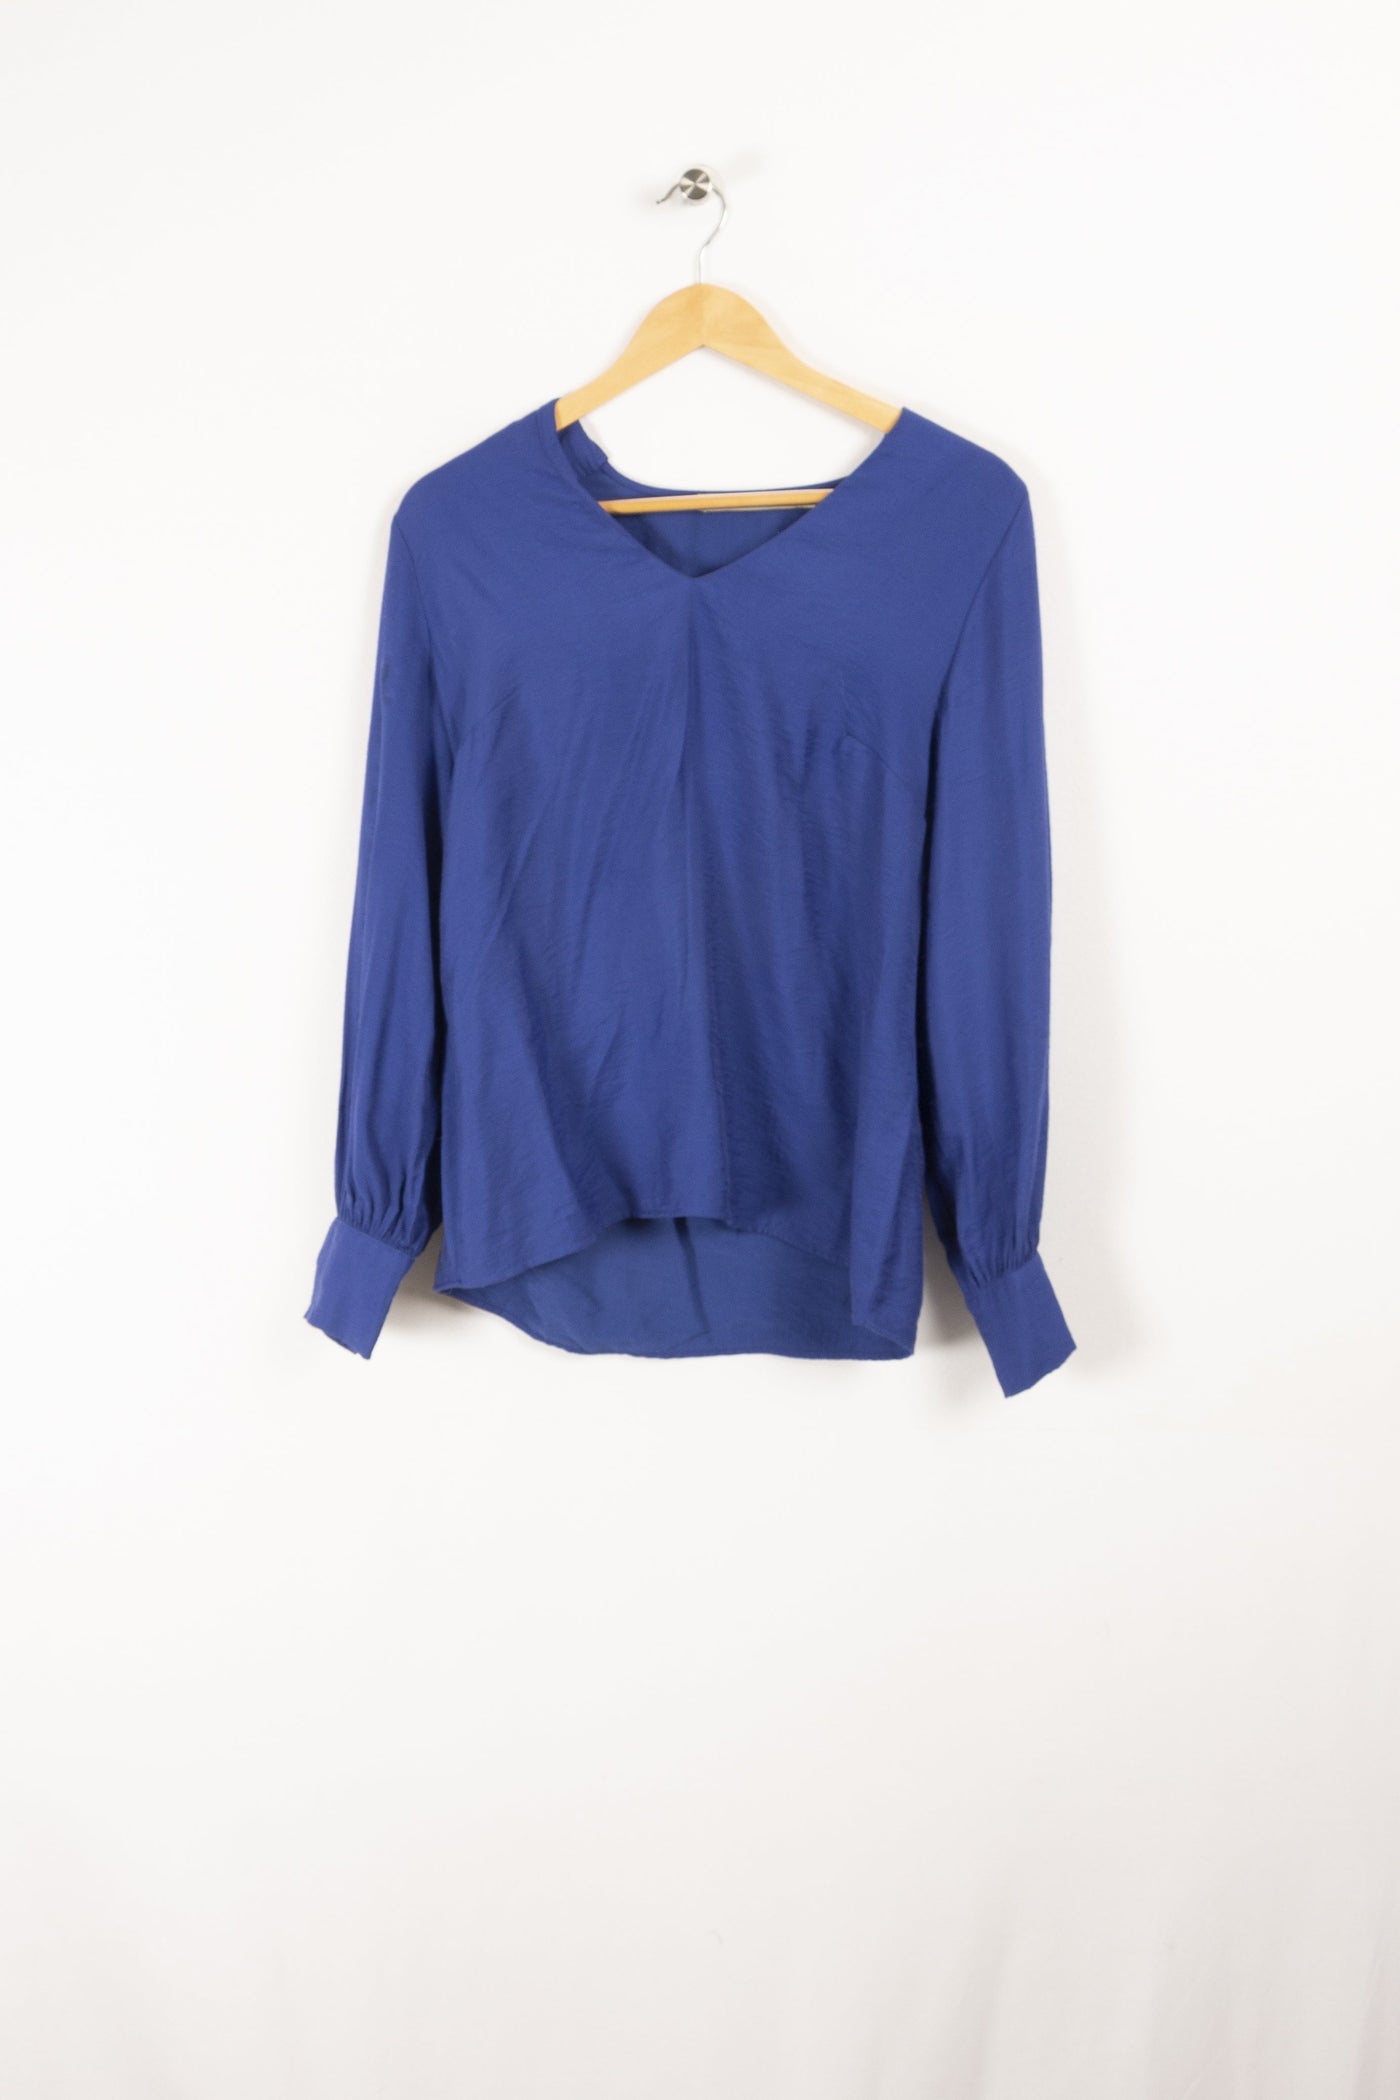 Pull bleu - Taille M/38